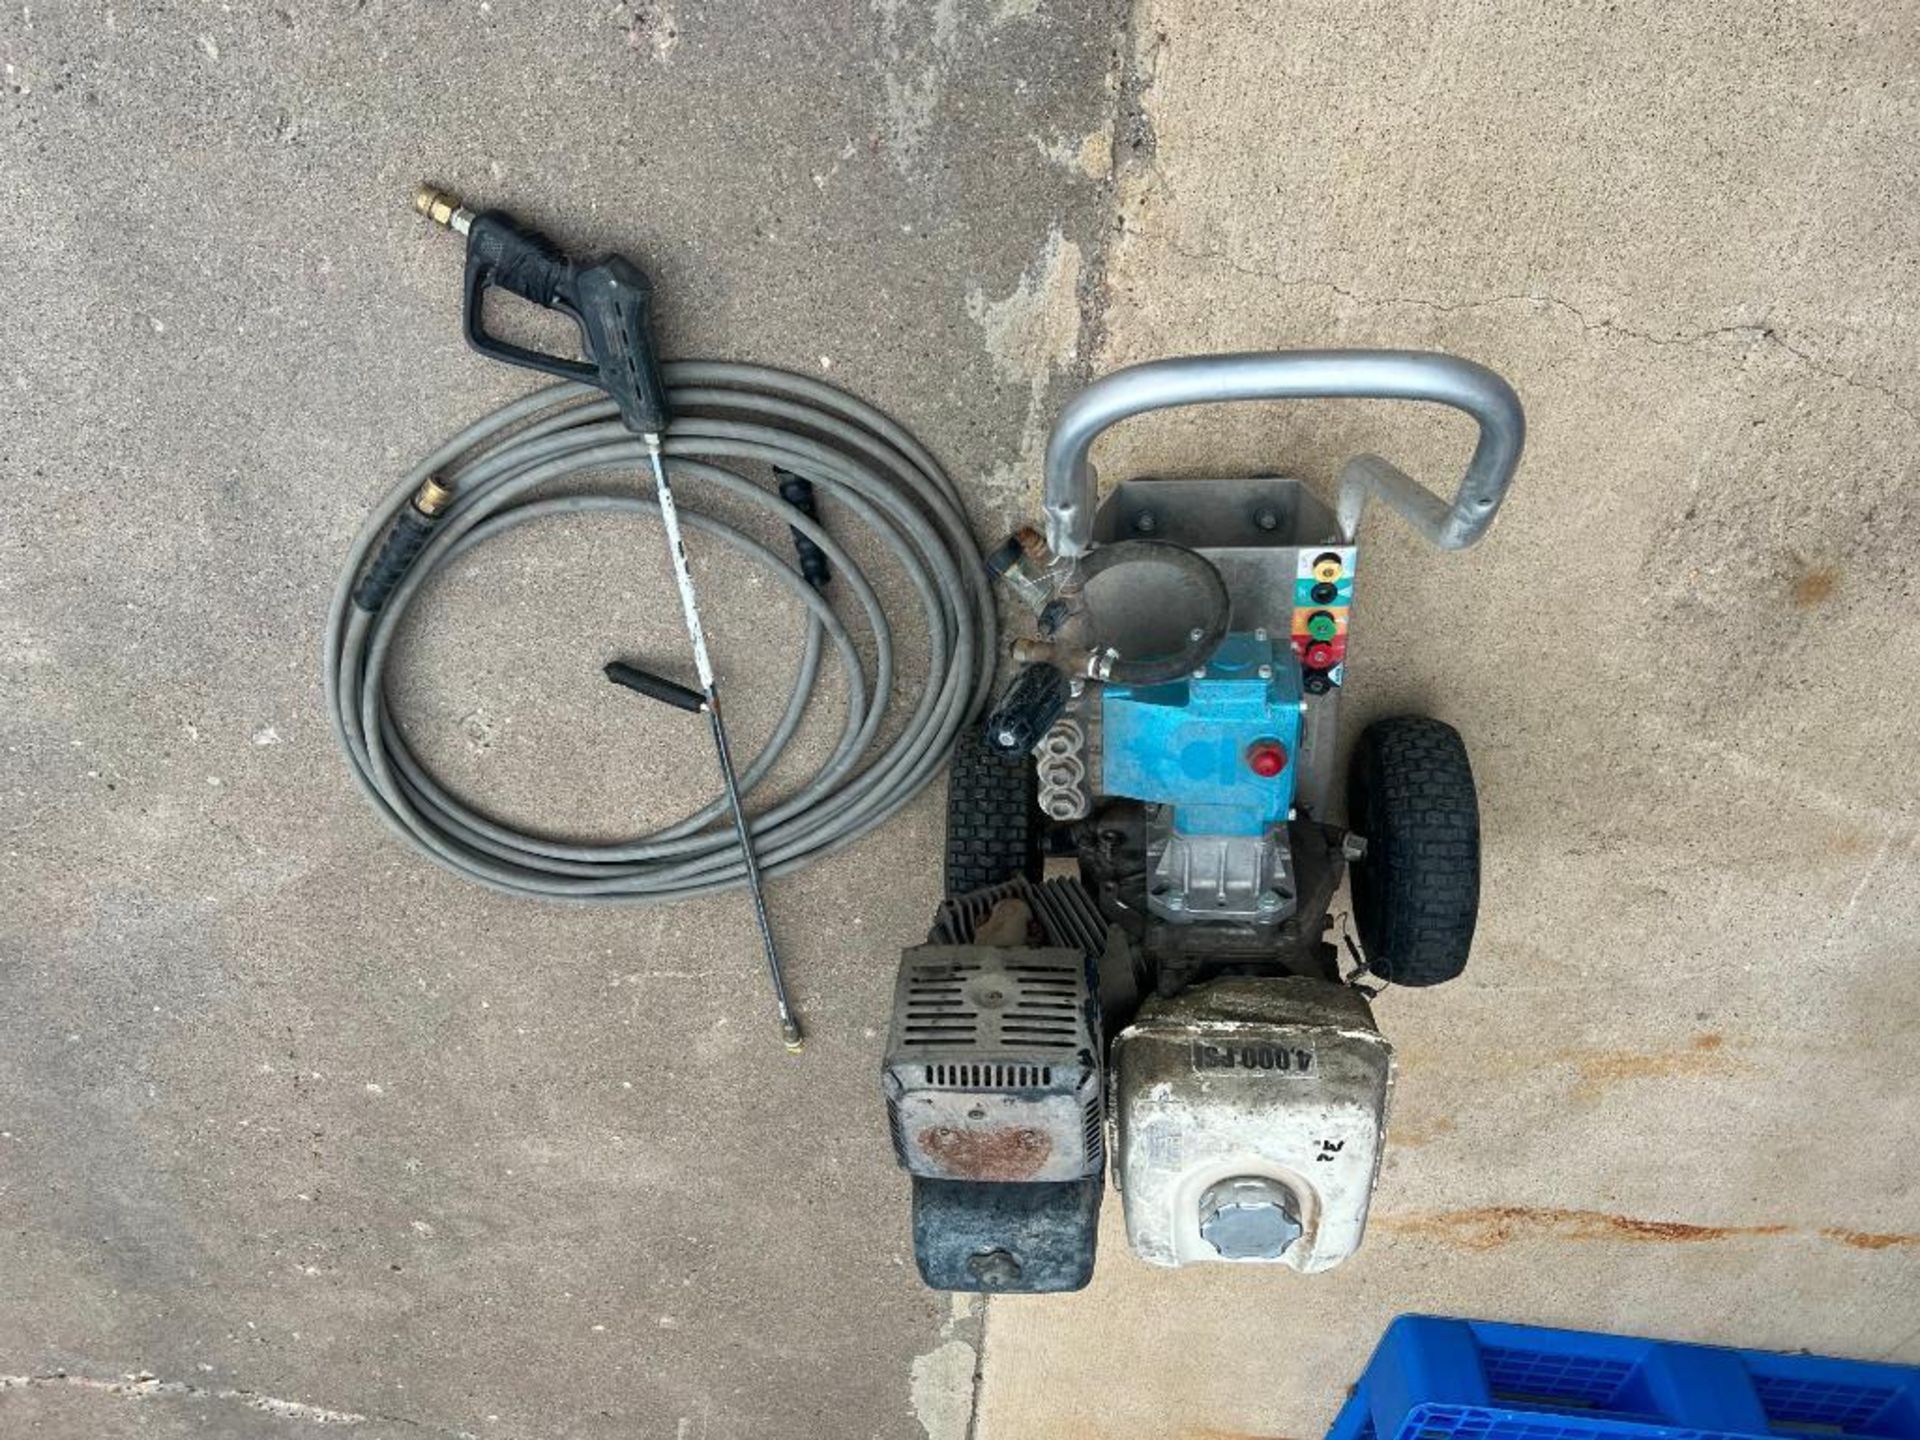 Honda Pressure Washer with Hose & Wand. Located in Mt. Pleasant, IA - Image 2 of 8